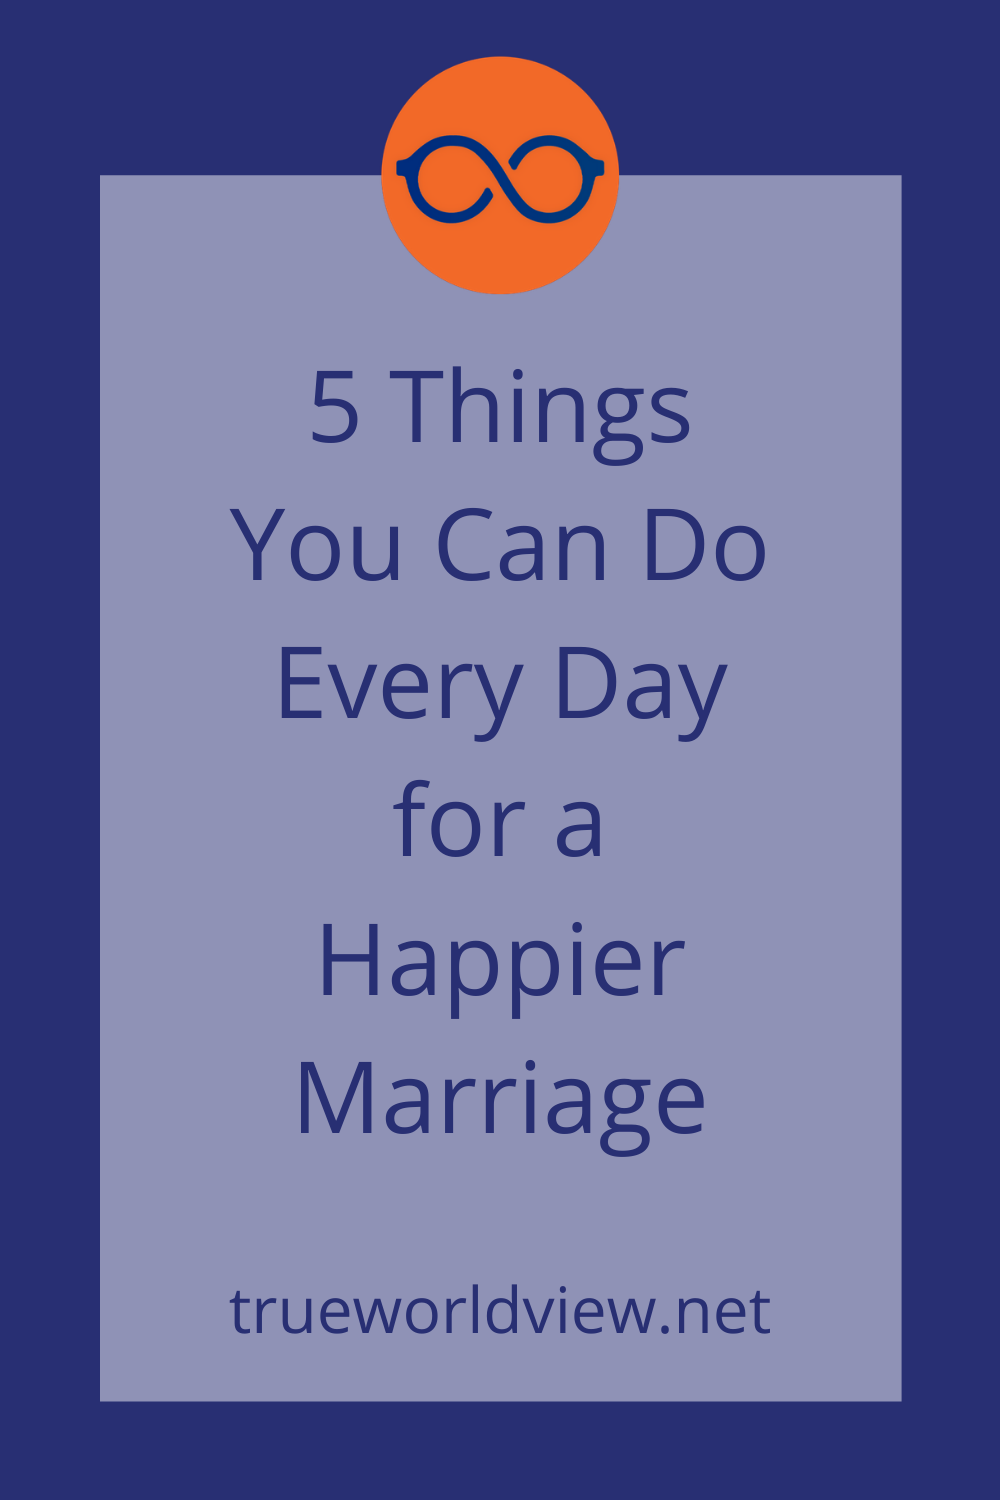 5 Things You Can Do Every Day for a Happier Marriage